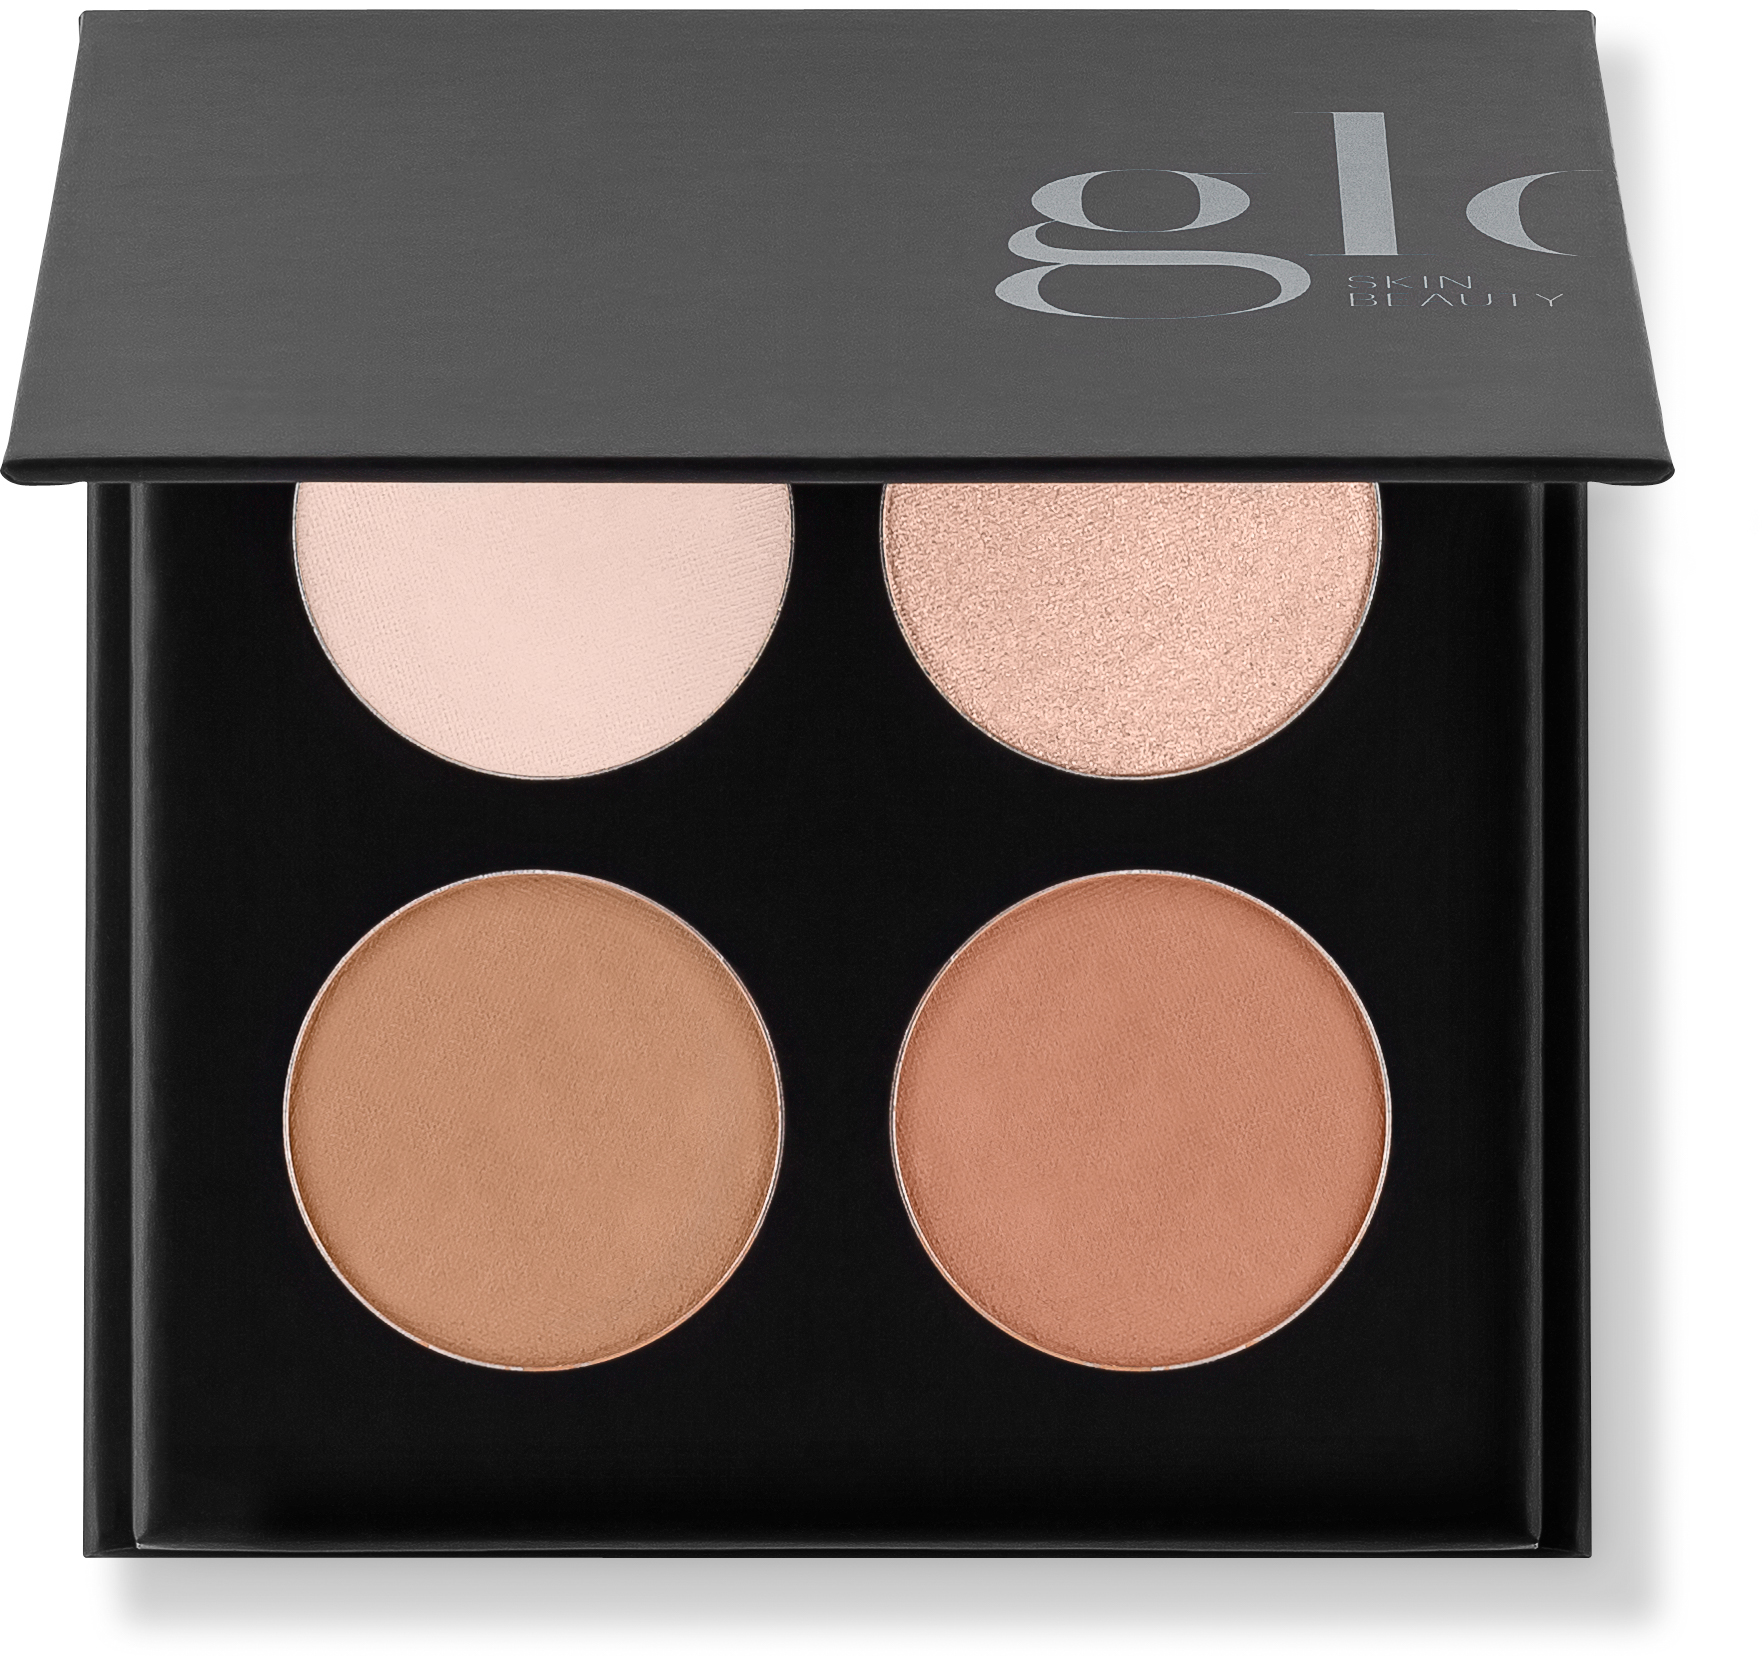 gloMinerals Contour Kit Fair to Light